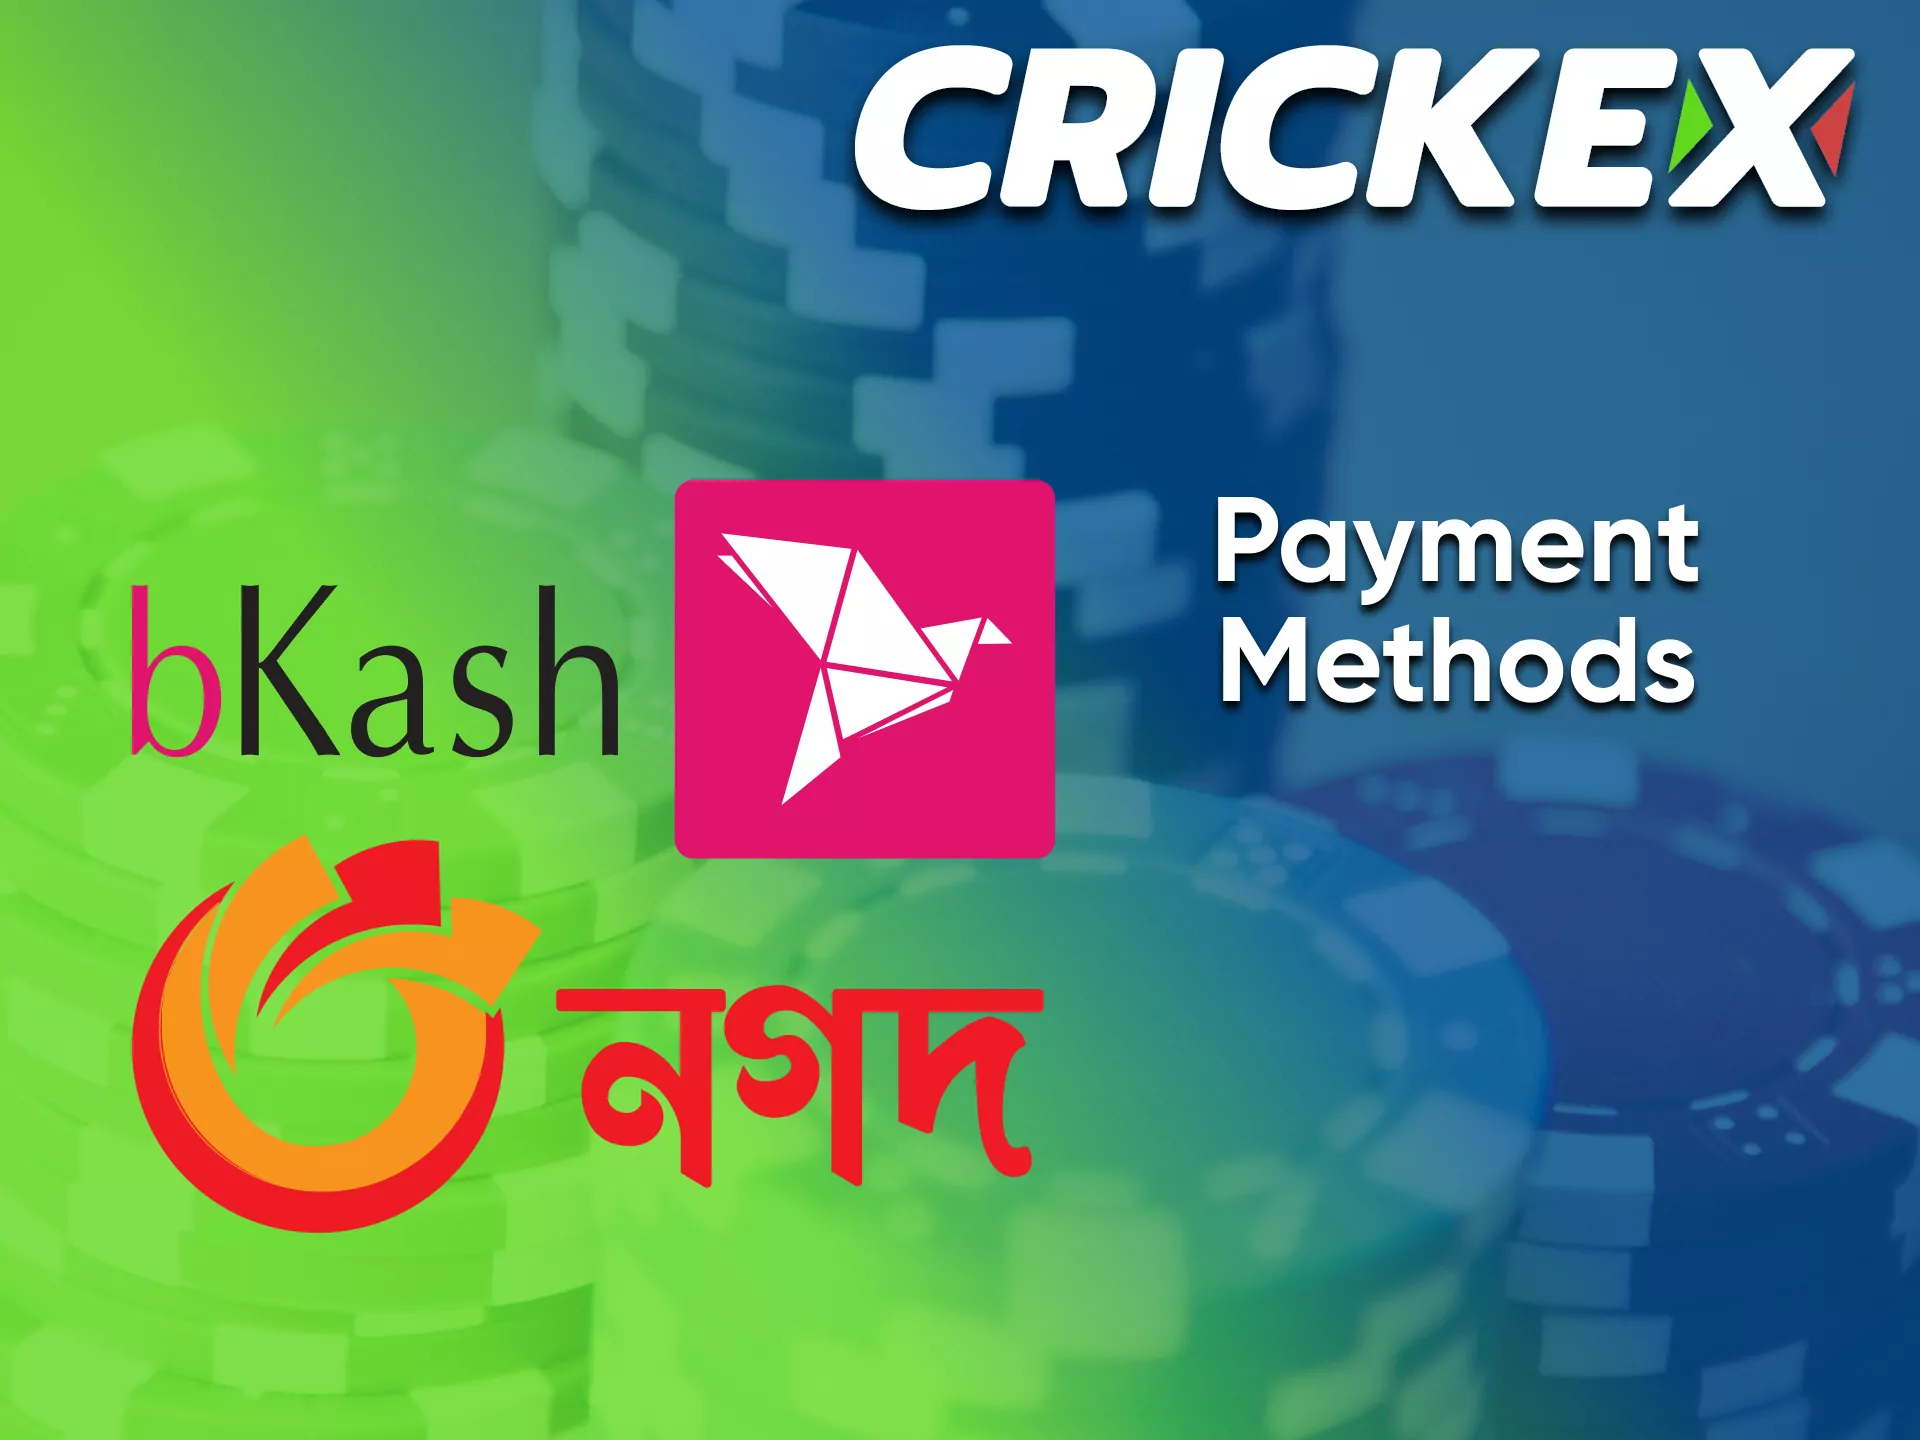 To start playing Crickex casino you need to make a deposit.